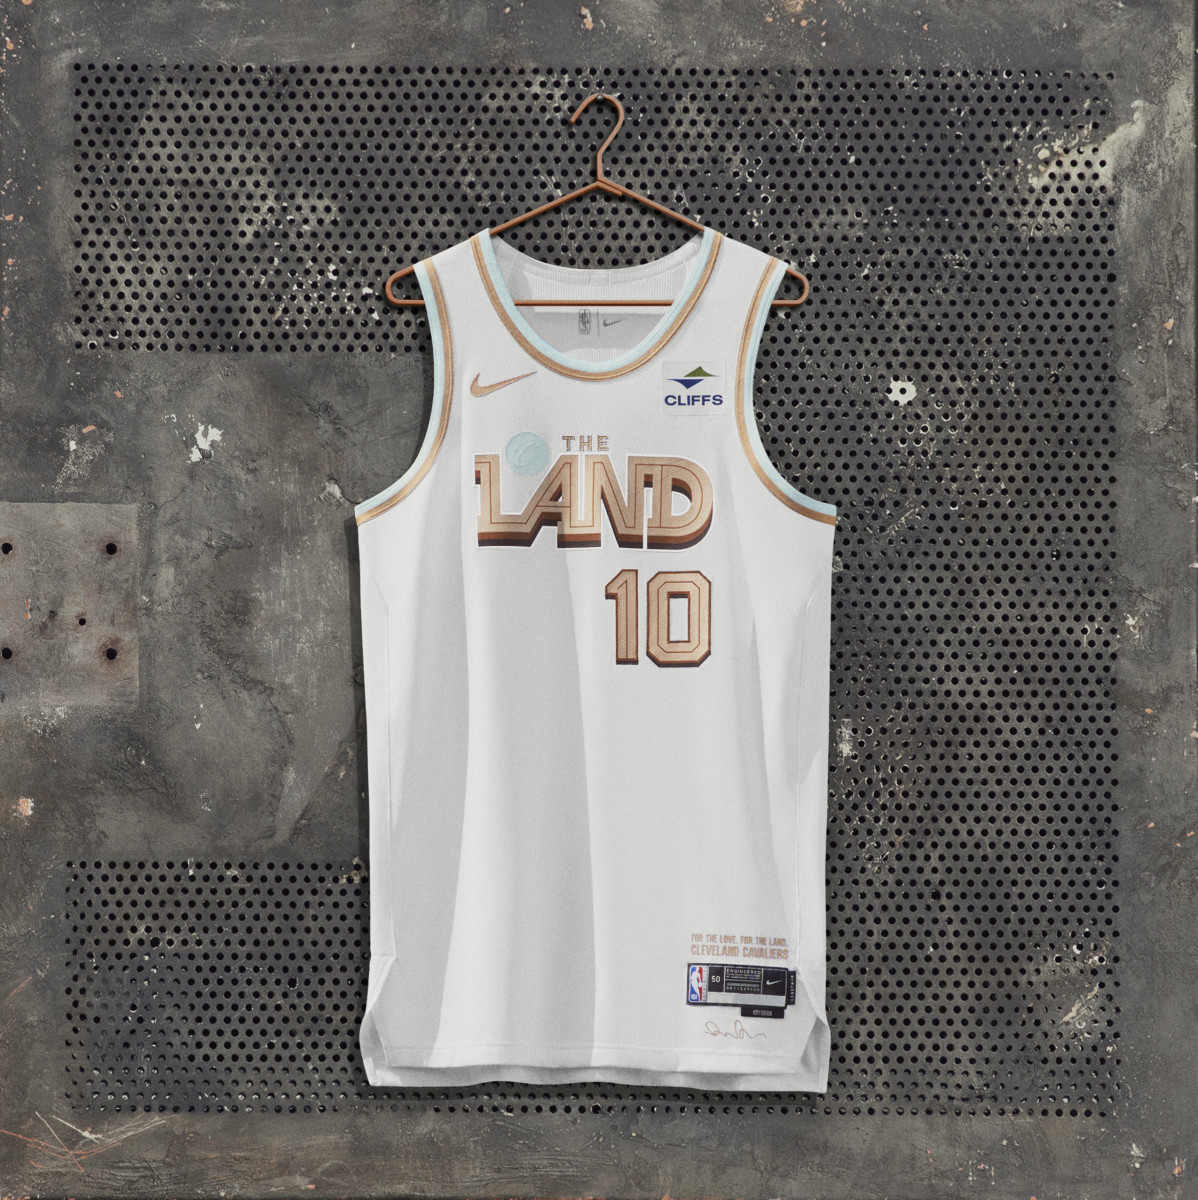 NIKE LEBRON JAMES CLEVELAND CAVALIERS CITY EDITION THE LAND JERSEY